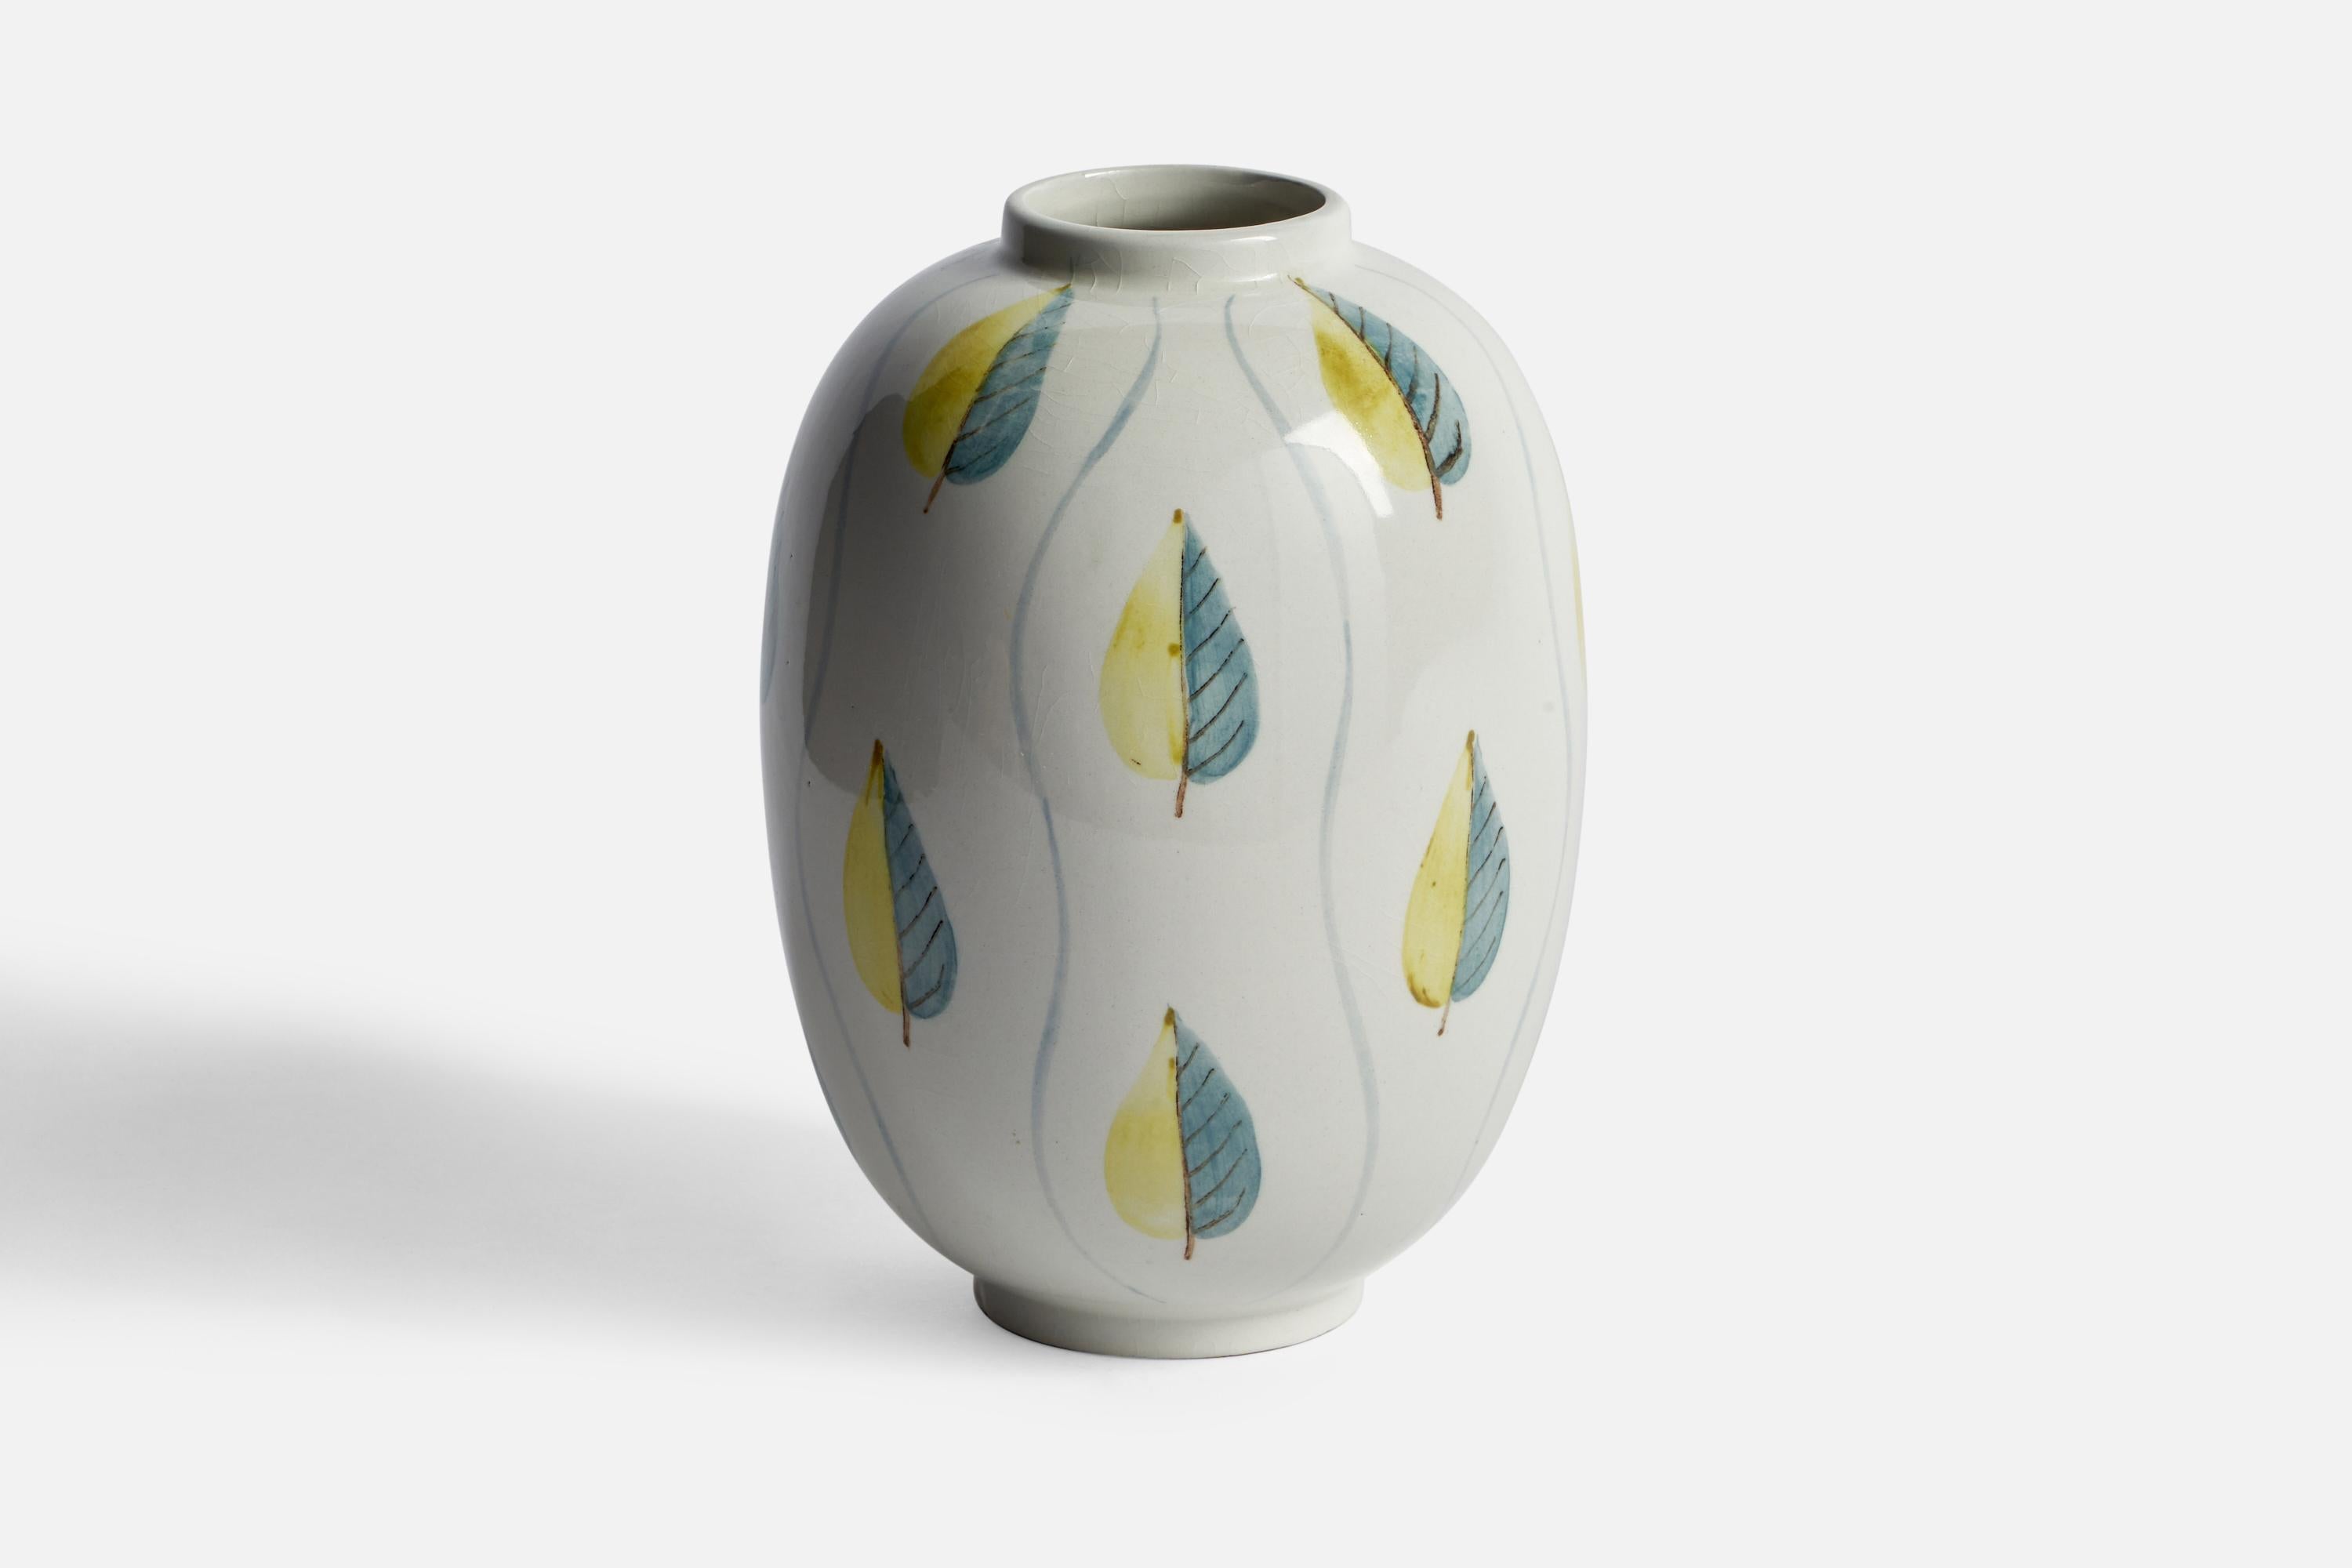 A hand-painted green, yellow and white vase designed and produced by Rörstrand, Sweden, 1940s.